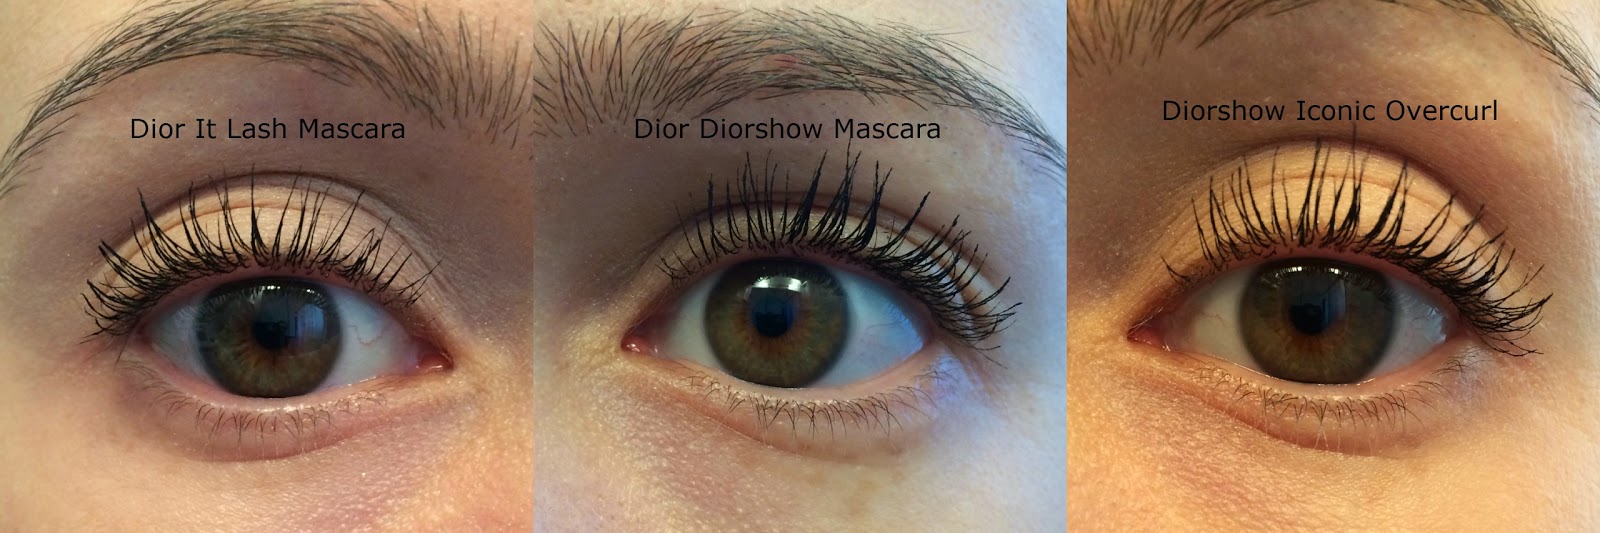 dior iconic overcurl mascara review